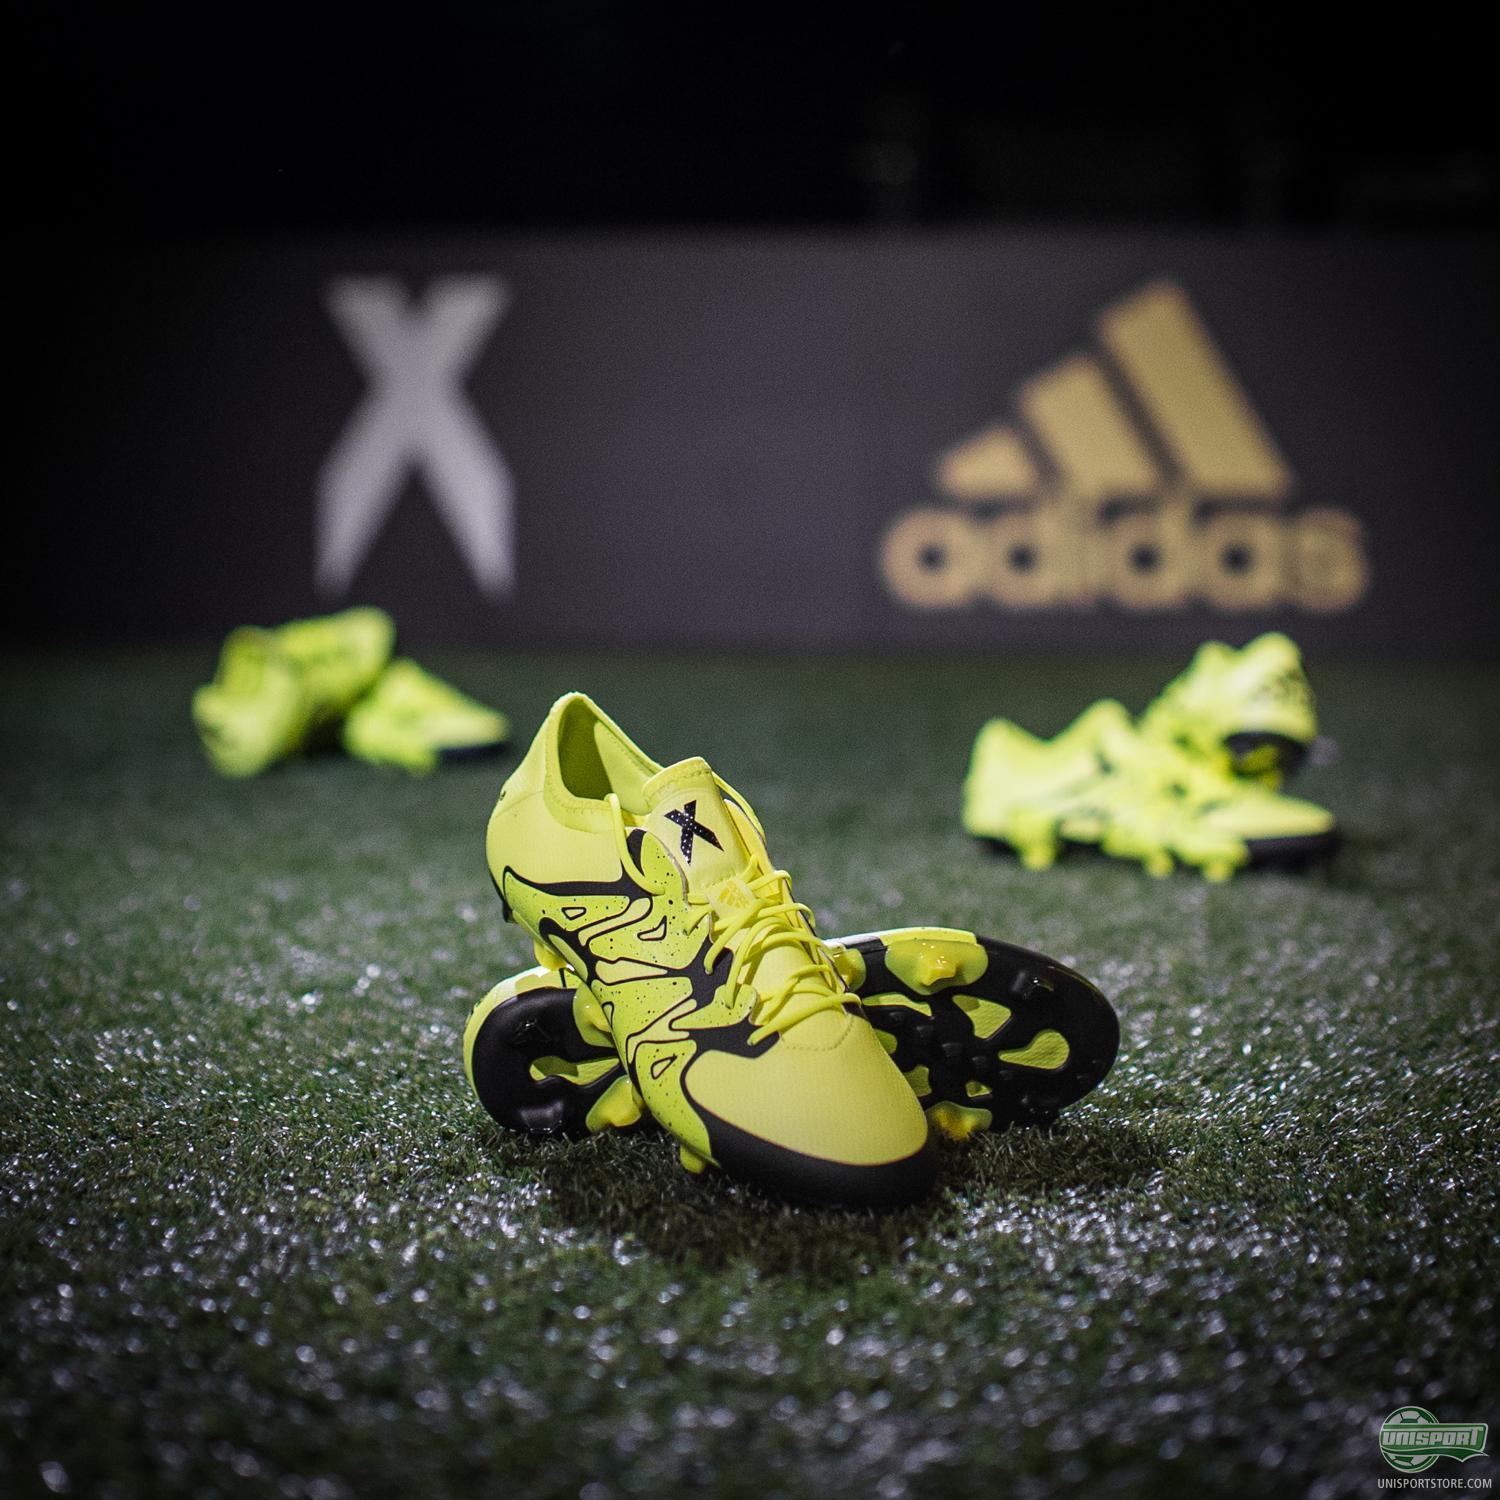 UnisportXadidas #BeTheDifference I Tricks and pannas with Ace and X